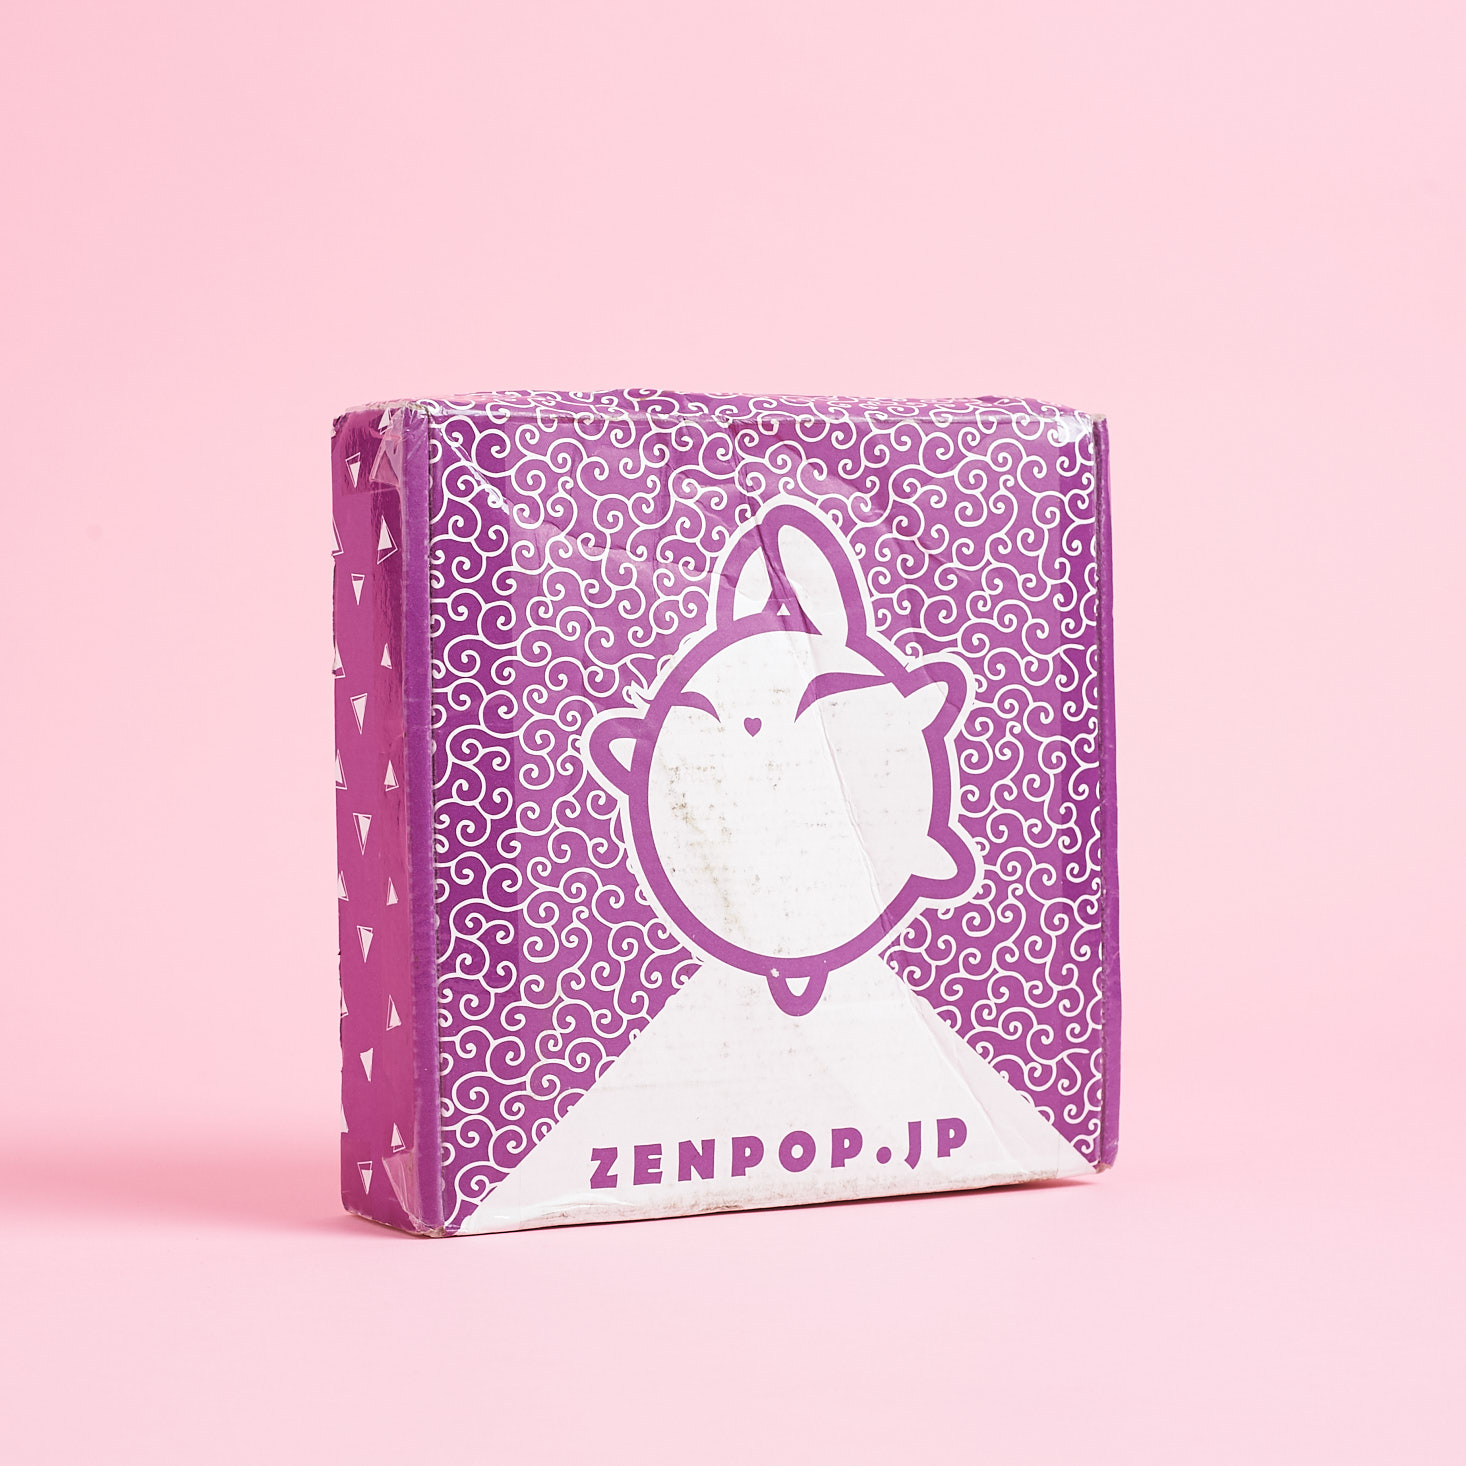 ZenPop Japanese Stationery Pack Review – July 2018